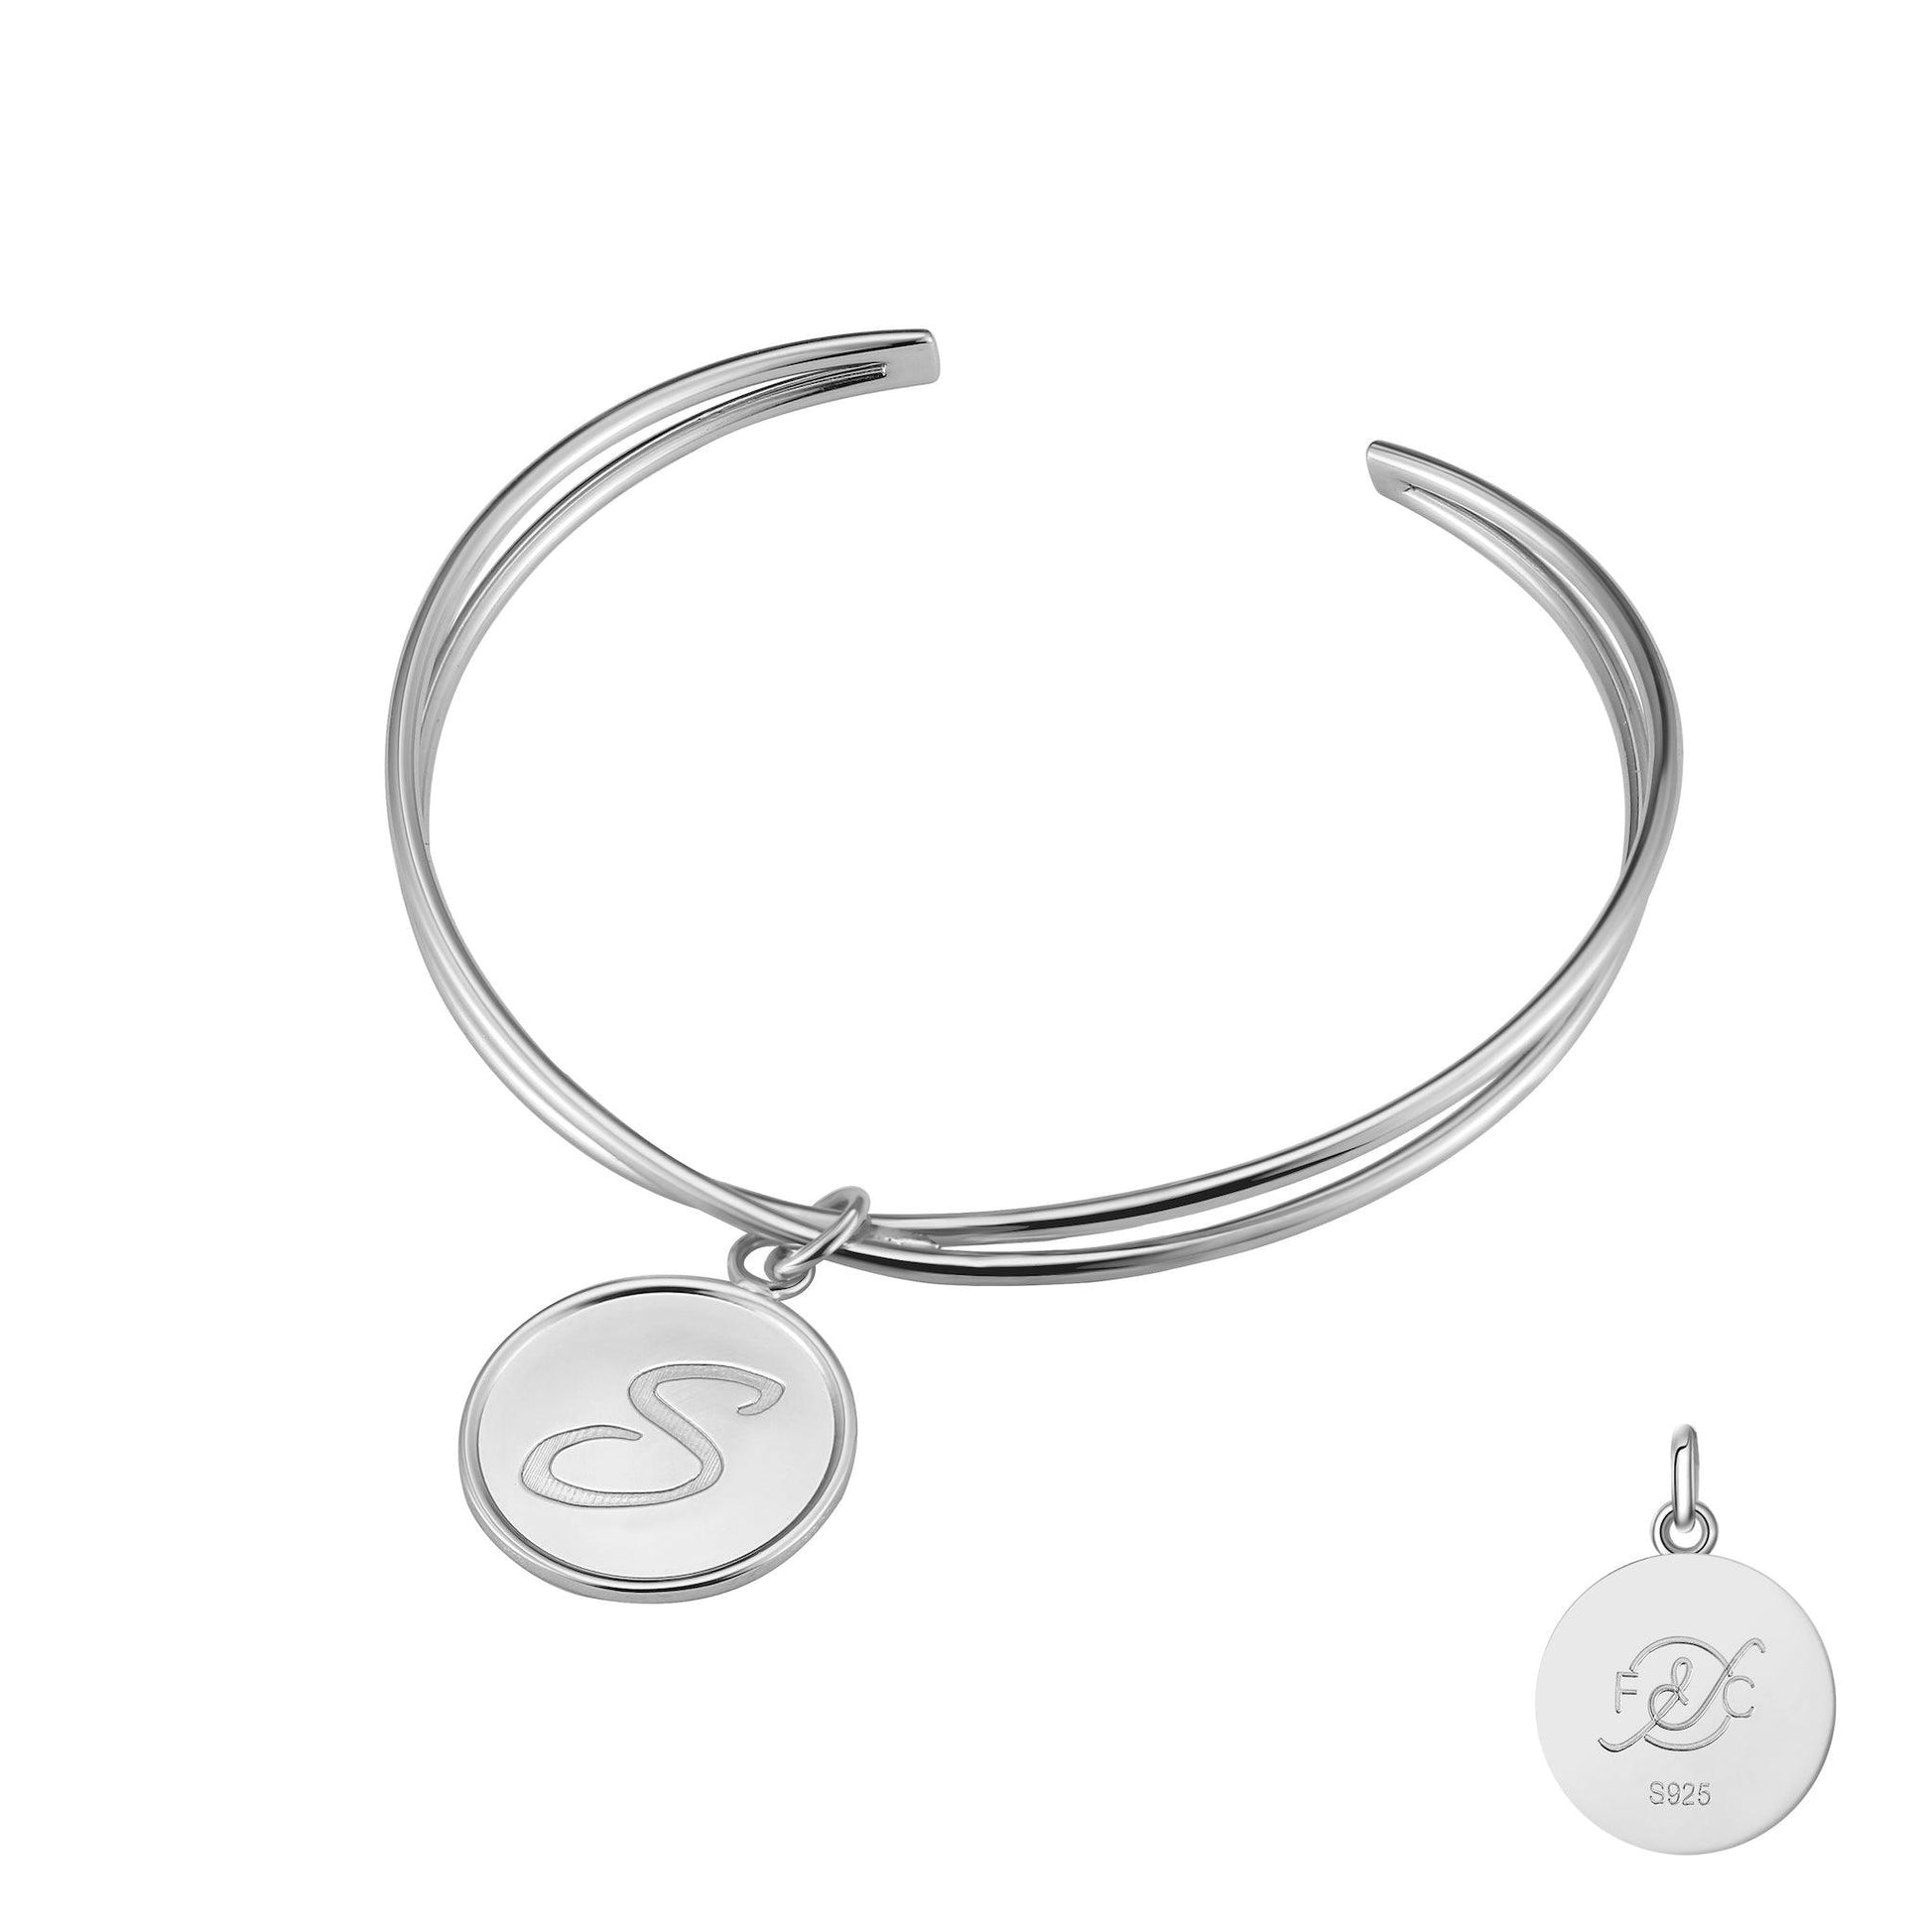 Infinity Initial Bracelet crafted in sterling silver, include an initial letter charm in a beautiful script.